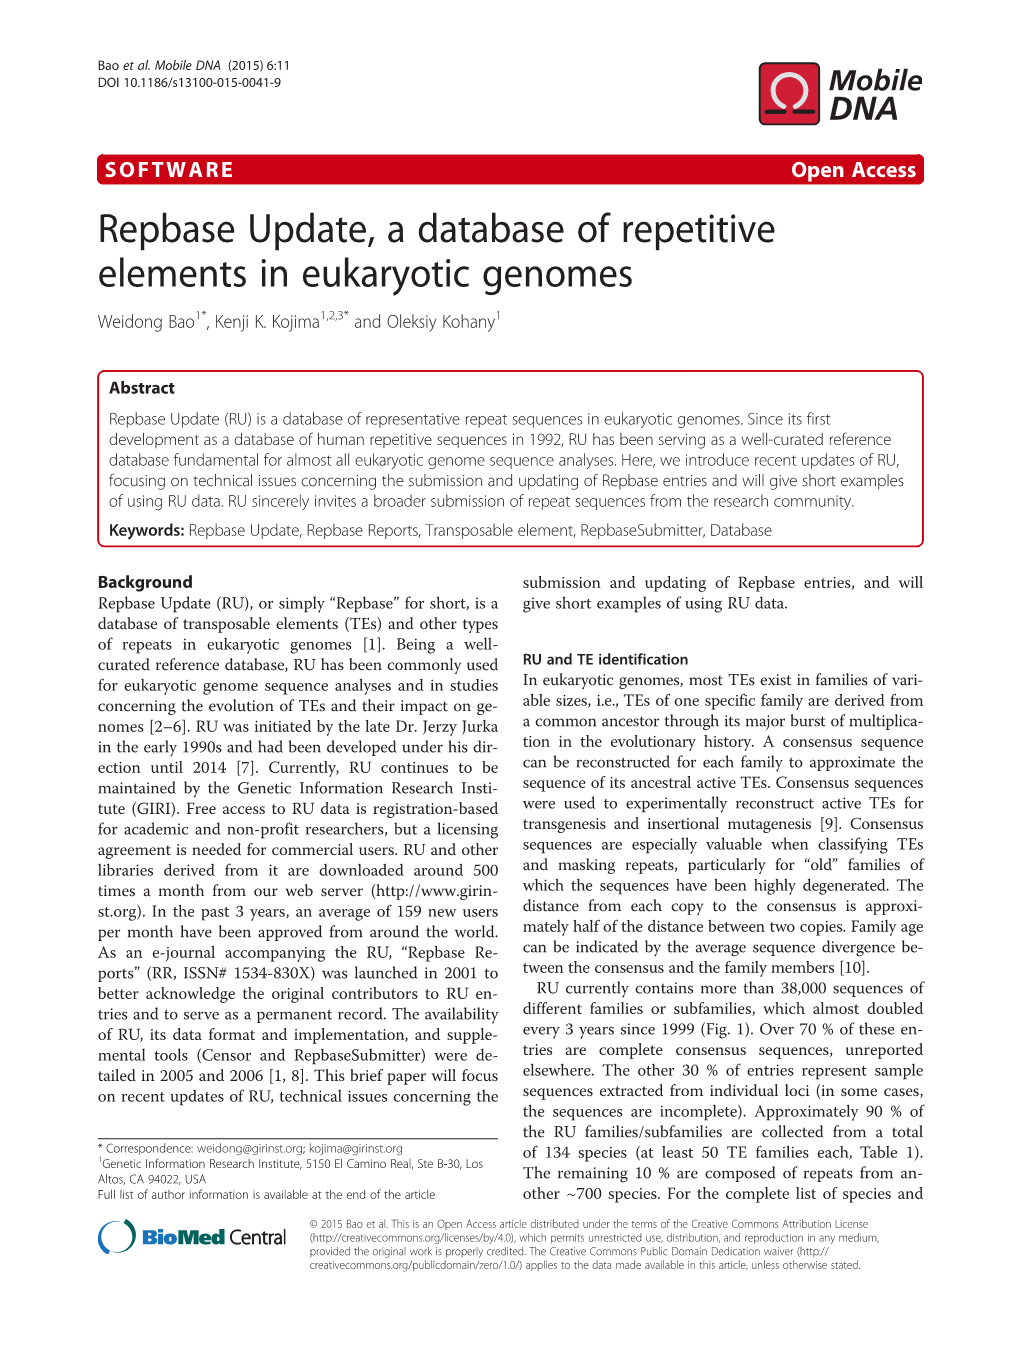 Repbase Update, a Database of Repetitive Elements in Eukaryotic Genomes Weidong Bao1*, Kenji K